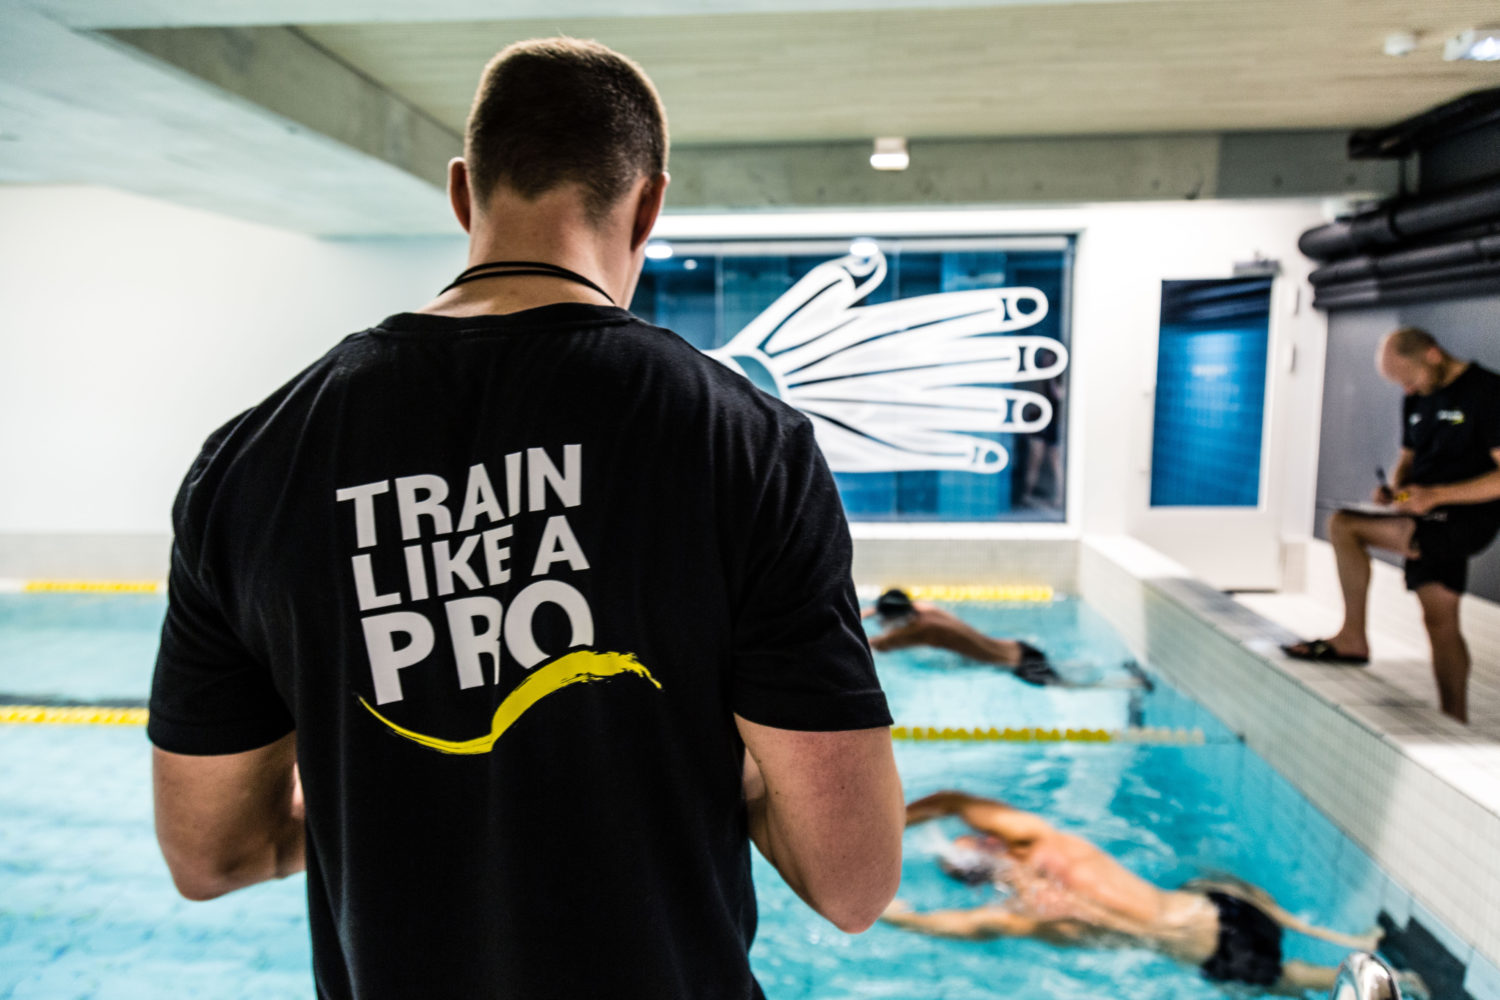 SwimGym Camps and Training Day. Train under professional swimming coaching. Improve your freestyle and your swimming technique. Train Like A Pro.